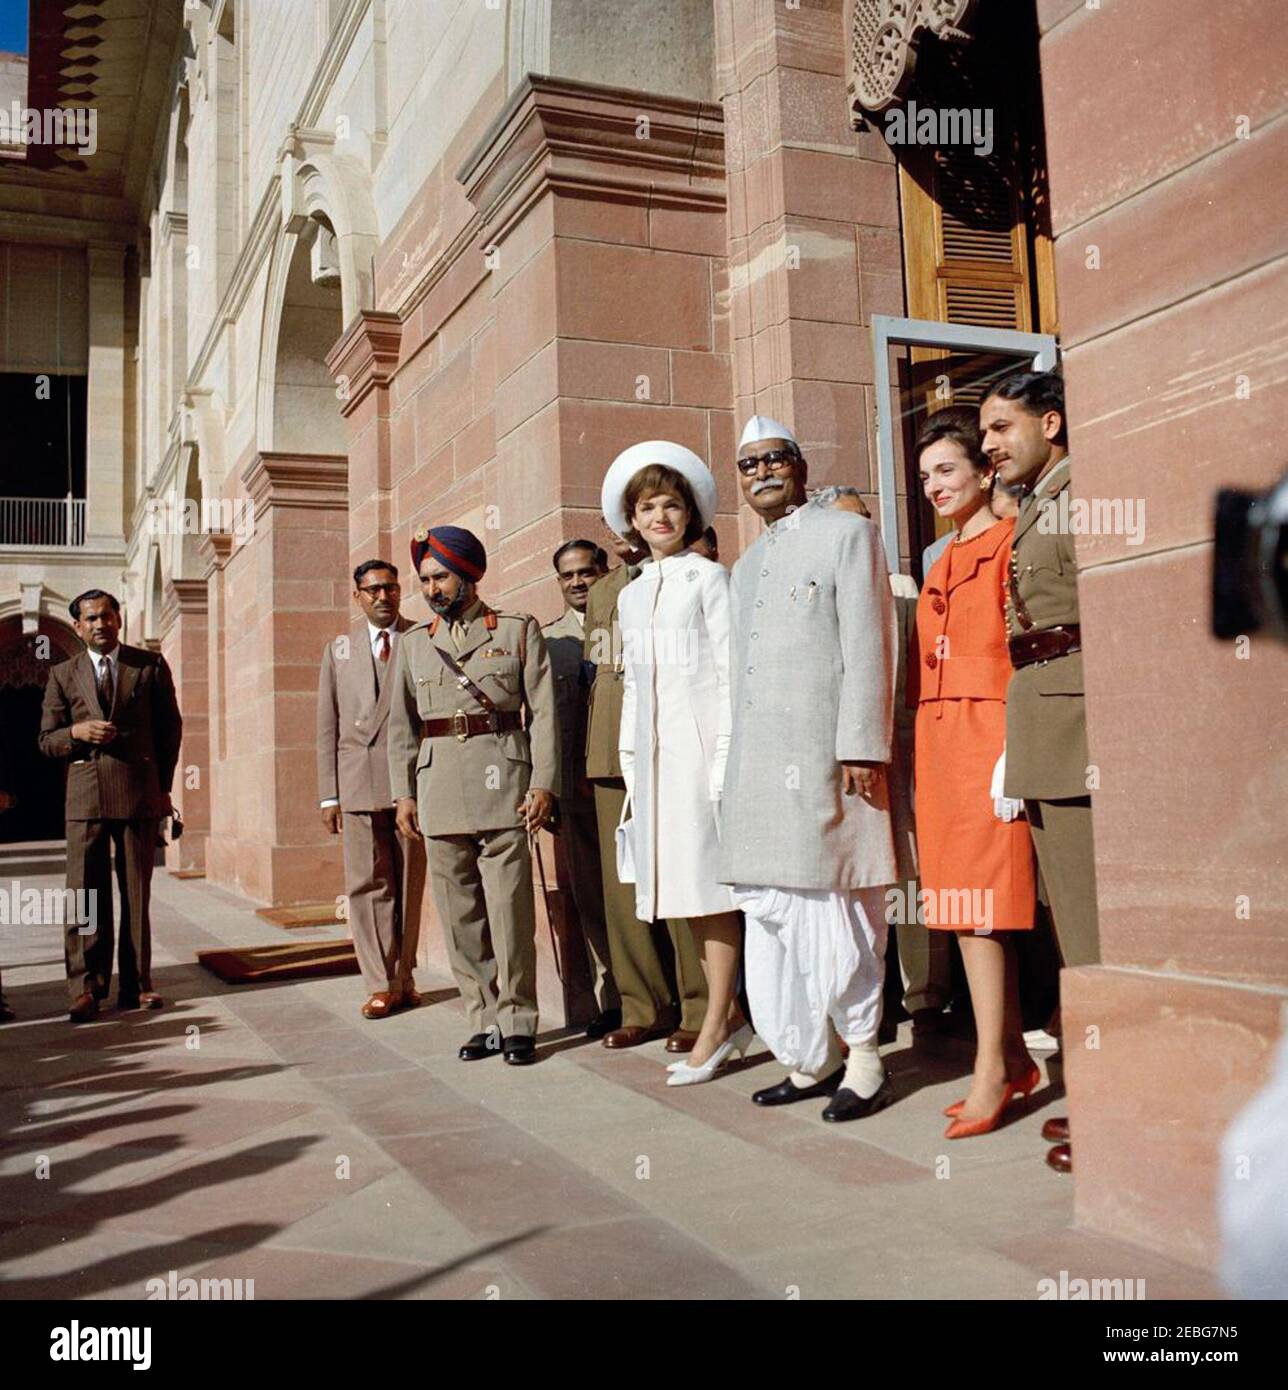 First Lady Jacqueline Kennedyu2019s (JBK) trip to India and Pakistan: New Delhi, Delhi, India, visit to Rashtrapati Bhavan, Official Residence of the President of India Dr. Rajendra Prasad. First Lady Jacqueline Kennedy and President of India Dr. Rajendra Prasad (right) stand in the doorway of Rashtrapati Bhavan, the Presidentu2019s official residence. Mrs. Kennedyu2019s sister, Princess Lee Radziwill of Poland, stands at right. New Delhi, India. Stock Photo